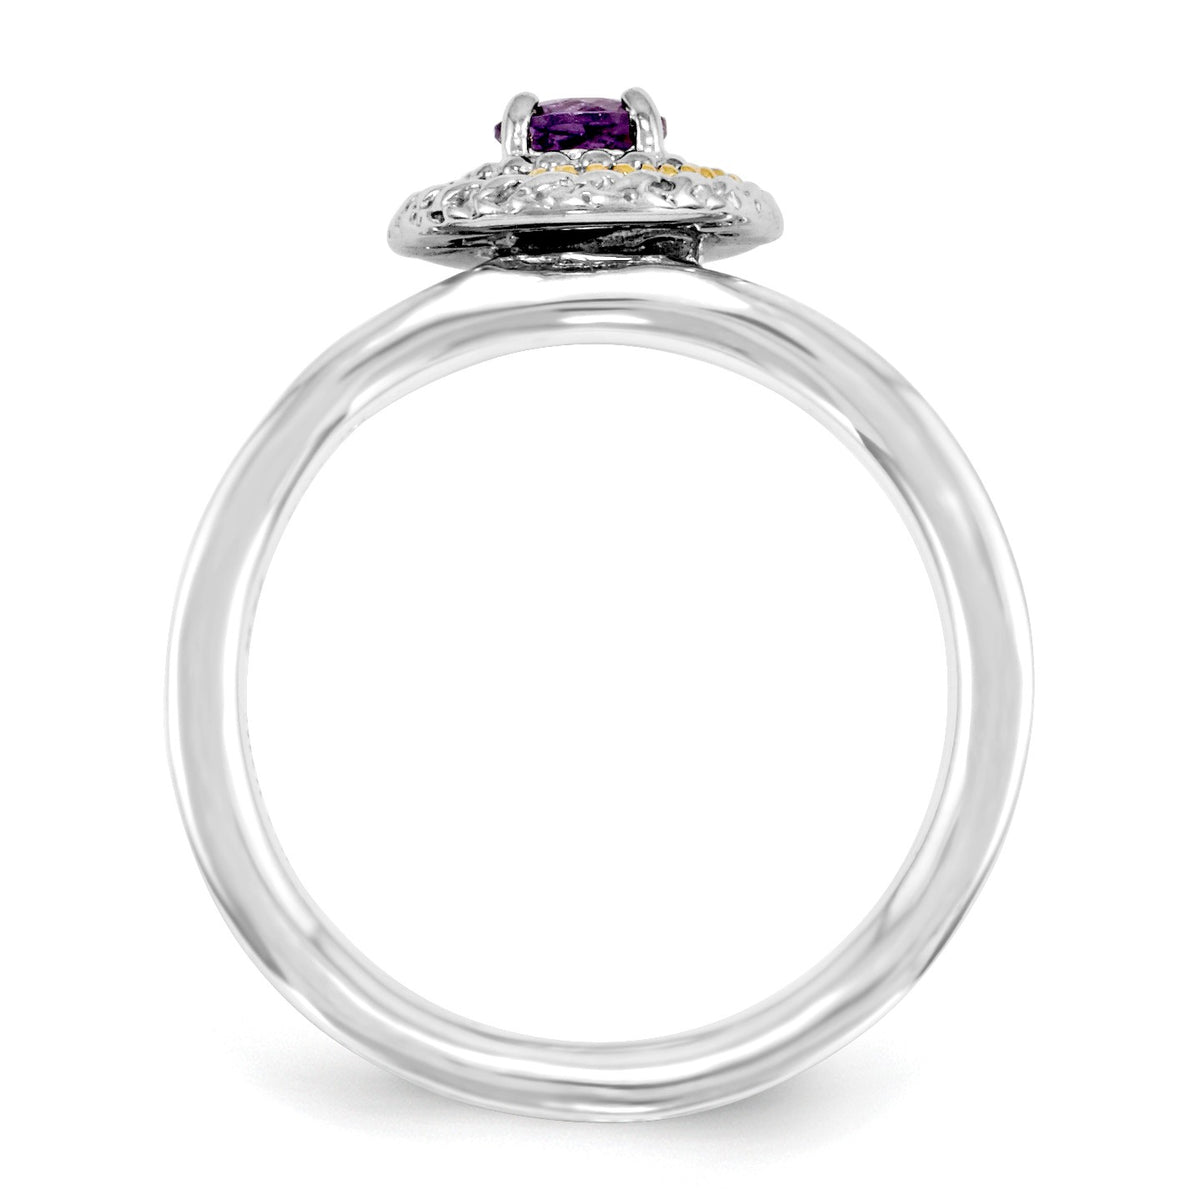 Alternate view of the Sterling Silver and 14k Gold Plated Stackable Amethyst Solitaire Ring by The Black Bow Jewelry Co.